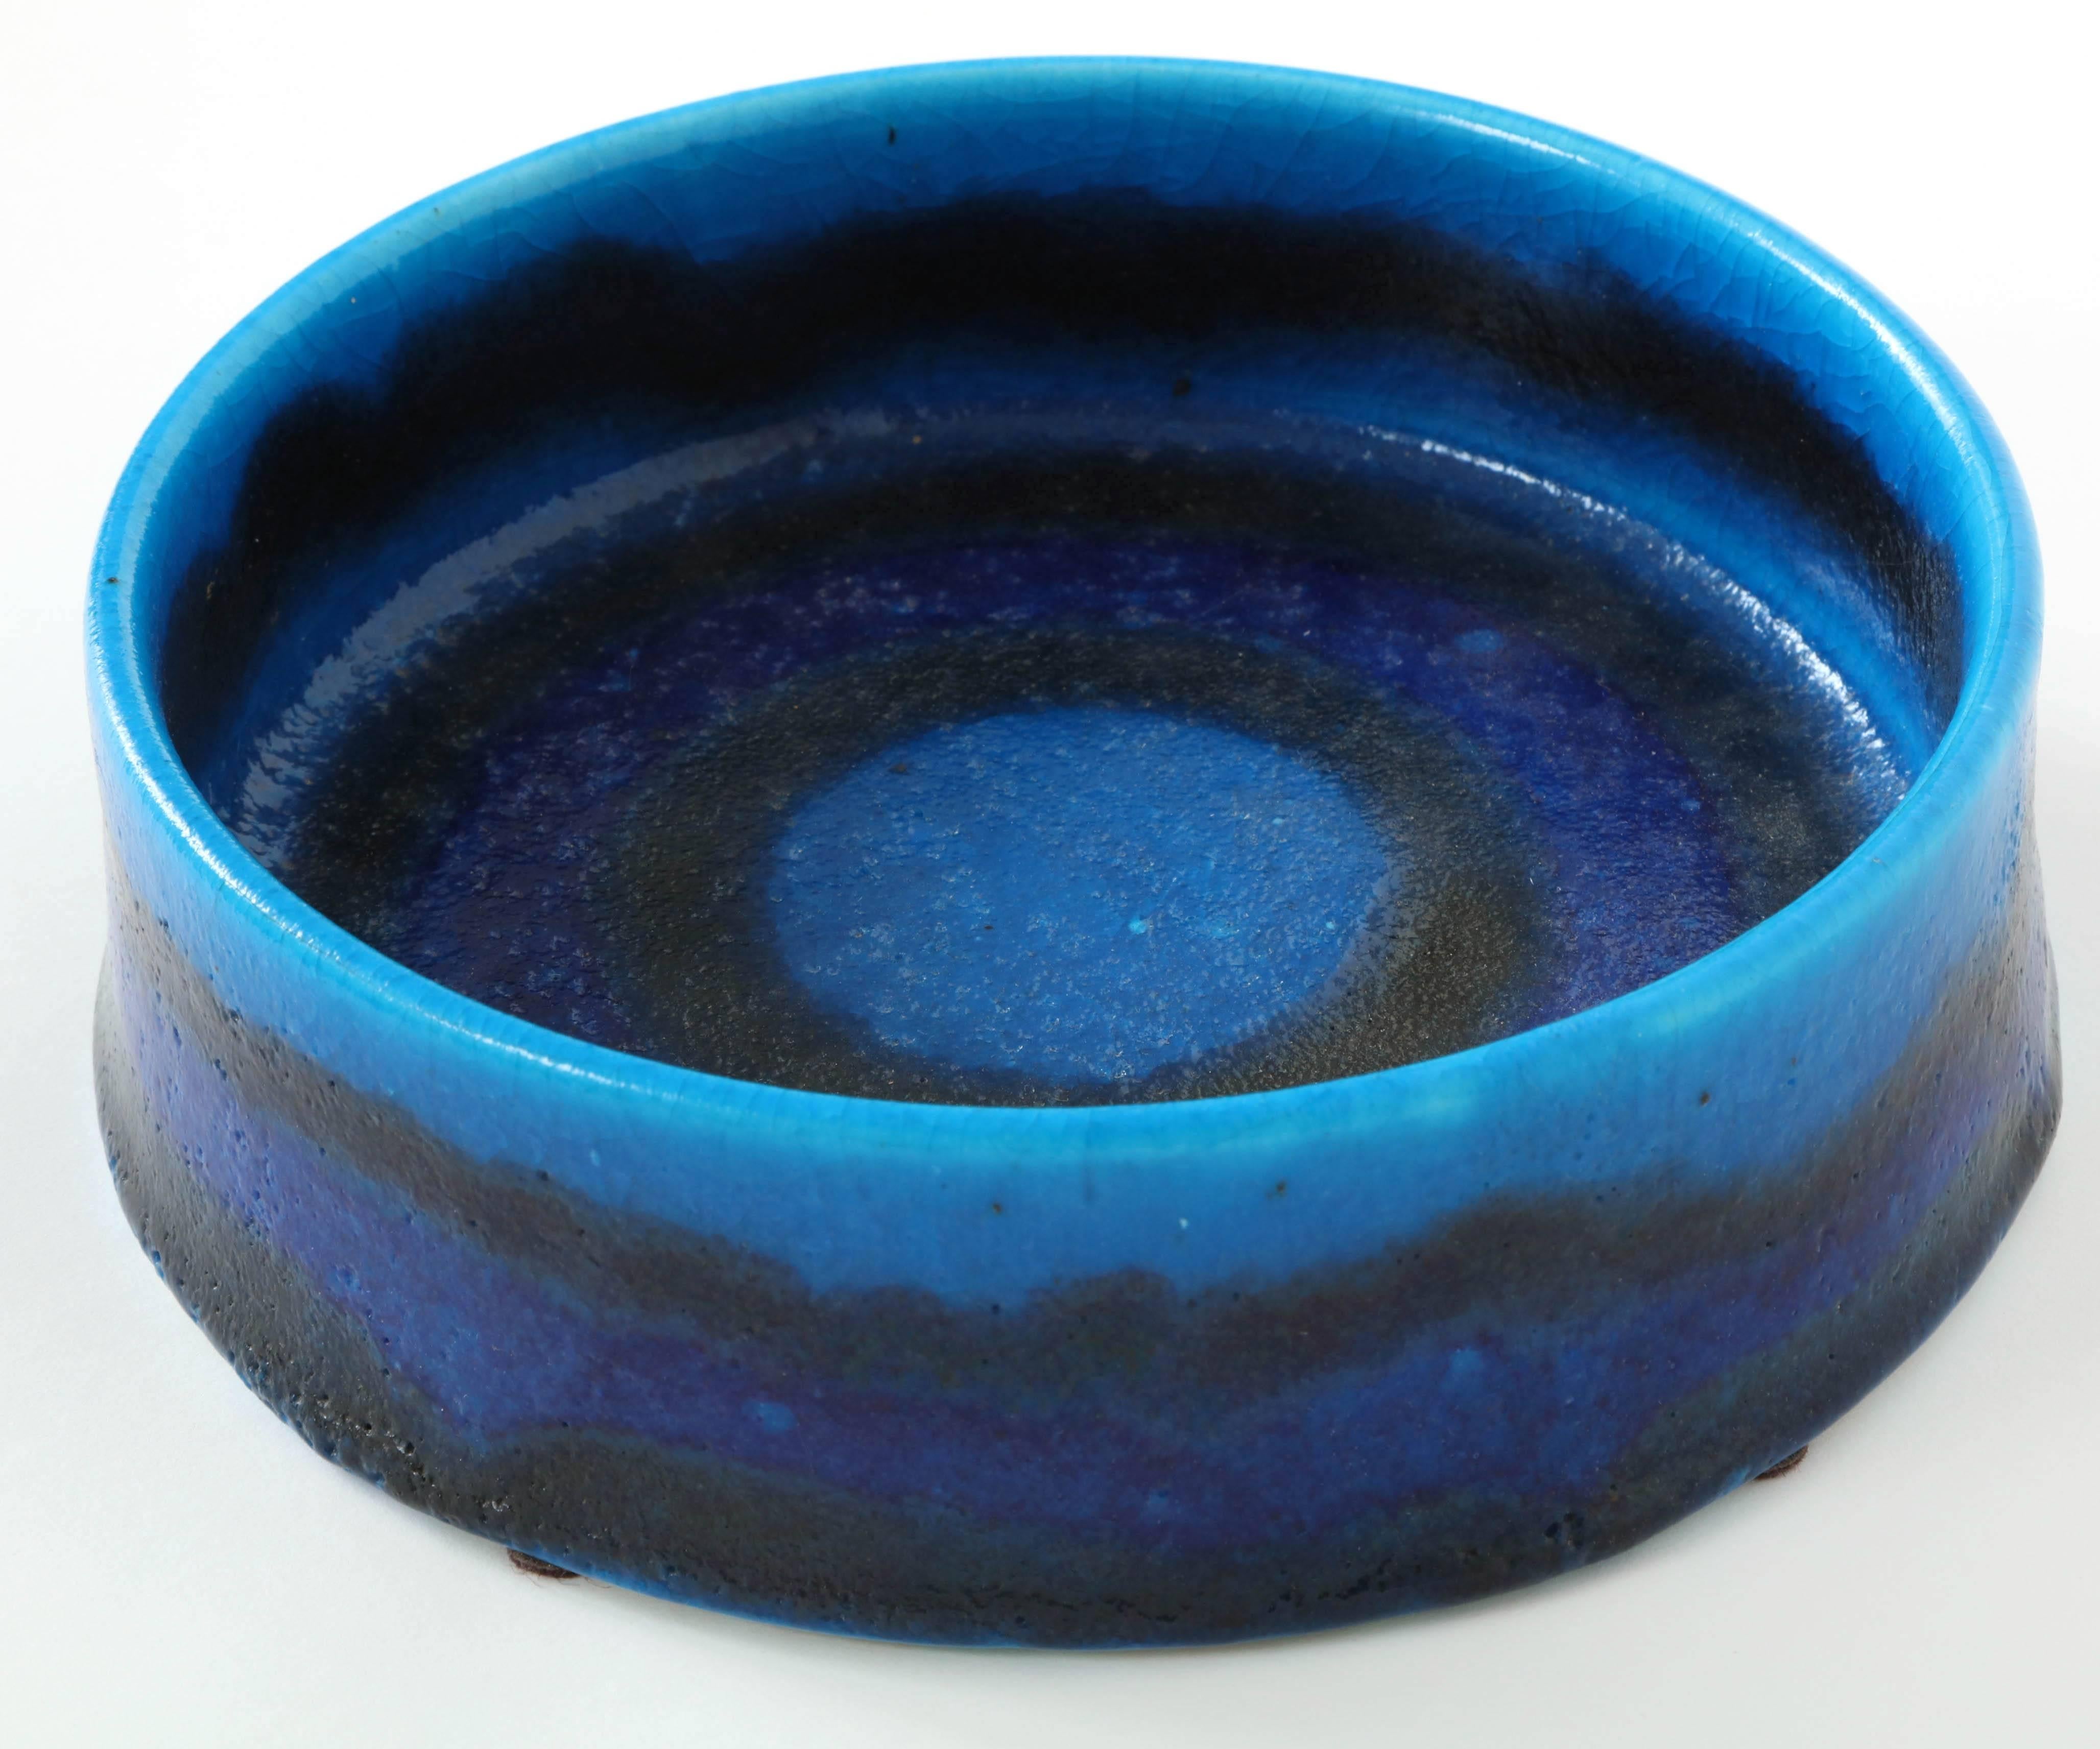 Cylindrical bowl painted in thick concentric rings of varying shades of blue. Great depth of coloration. By Bruno Gambone, 1970s, signed on underside.